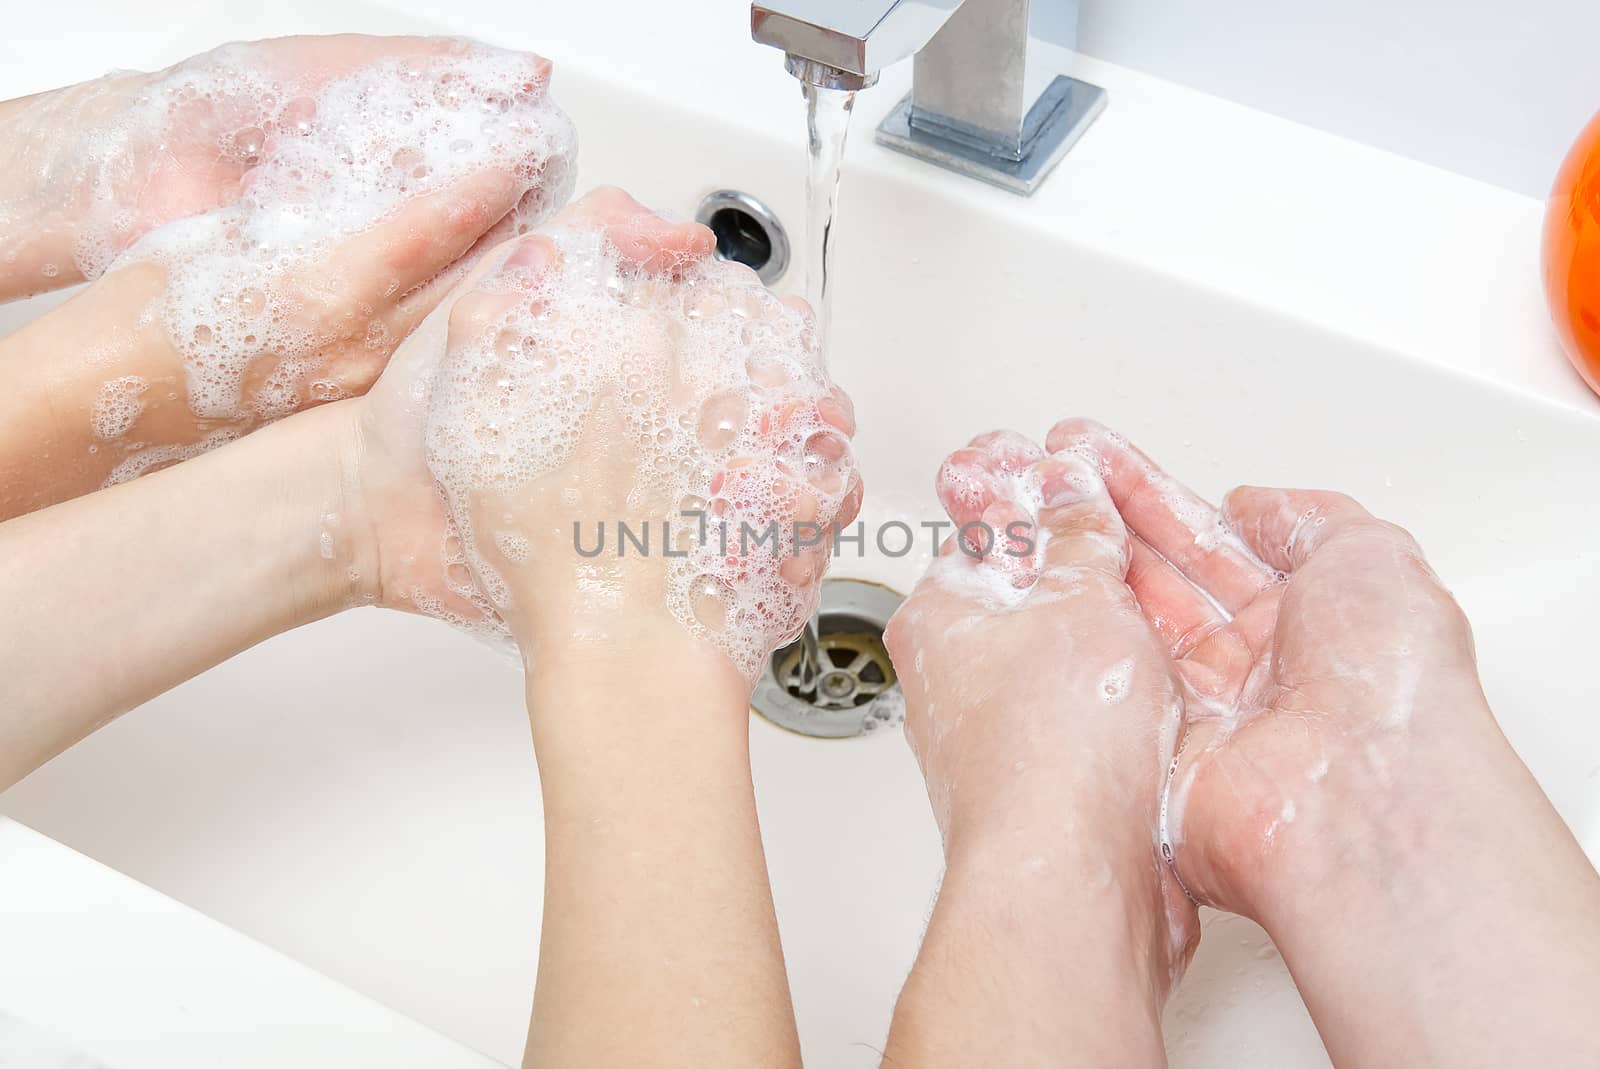 Childrens washing hands with soap under the crane with water. close-up. personal hygiene concept by PhotoTime